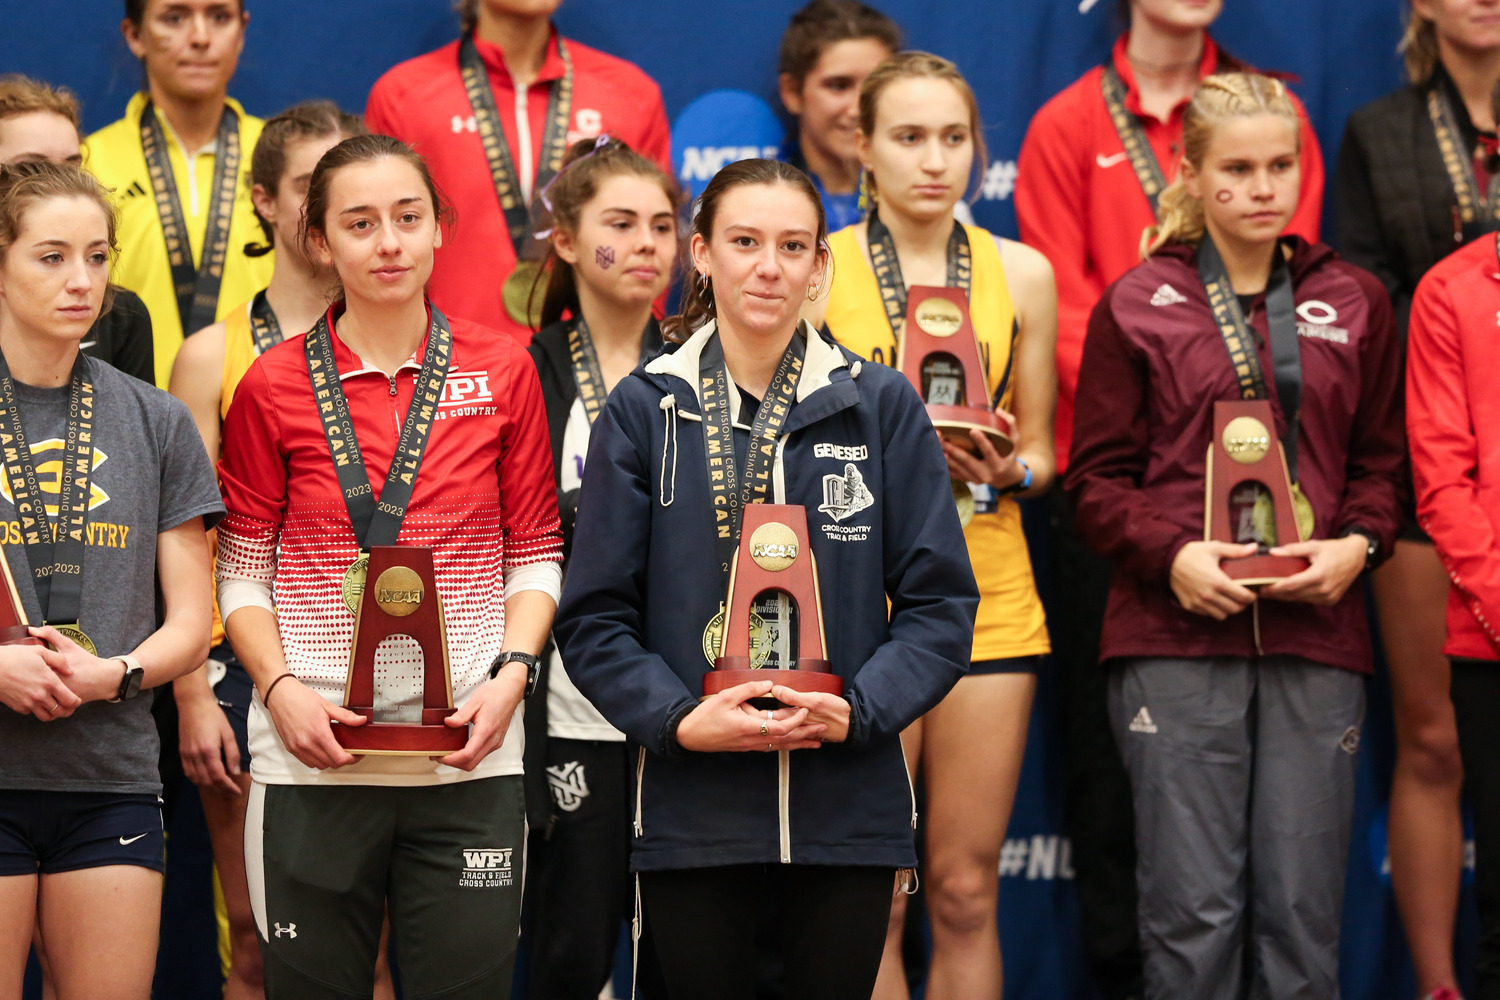 Pierson graduate Penelope Greene finished third at the NCAA Division III Cross Country Championships on November 18 and earned All-American honors. BENJAMIN GAJEWSKI